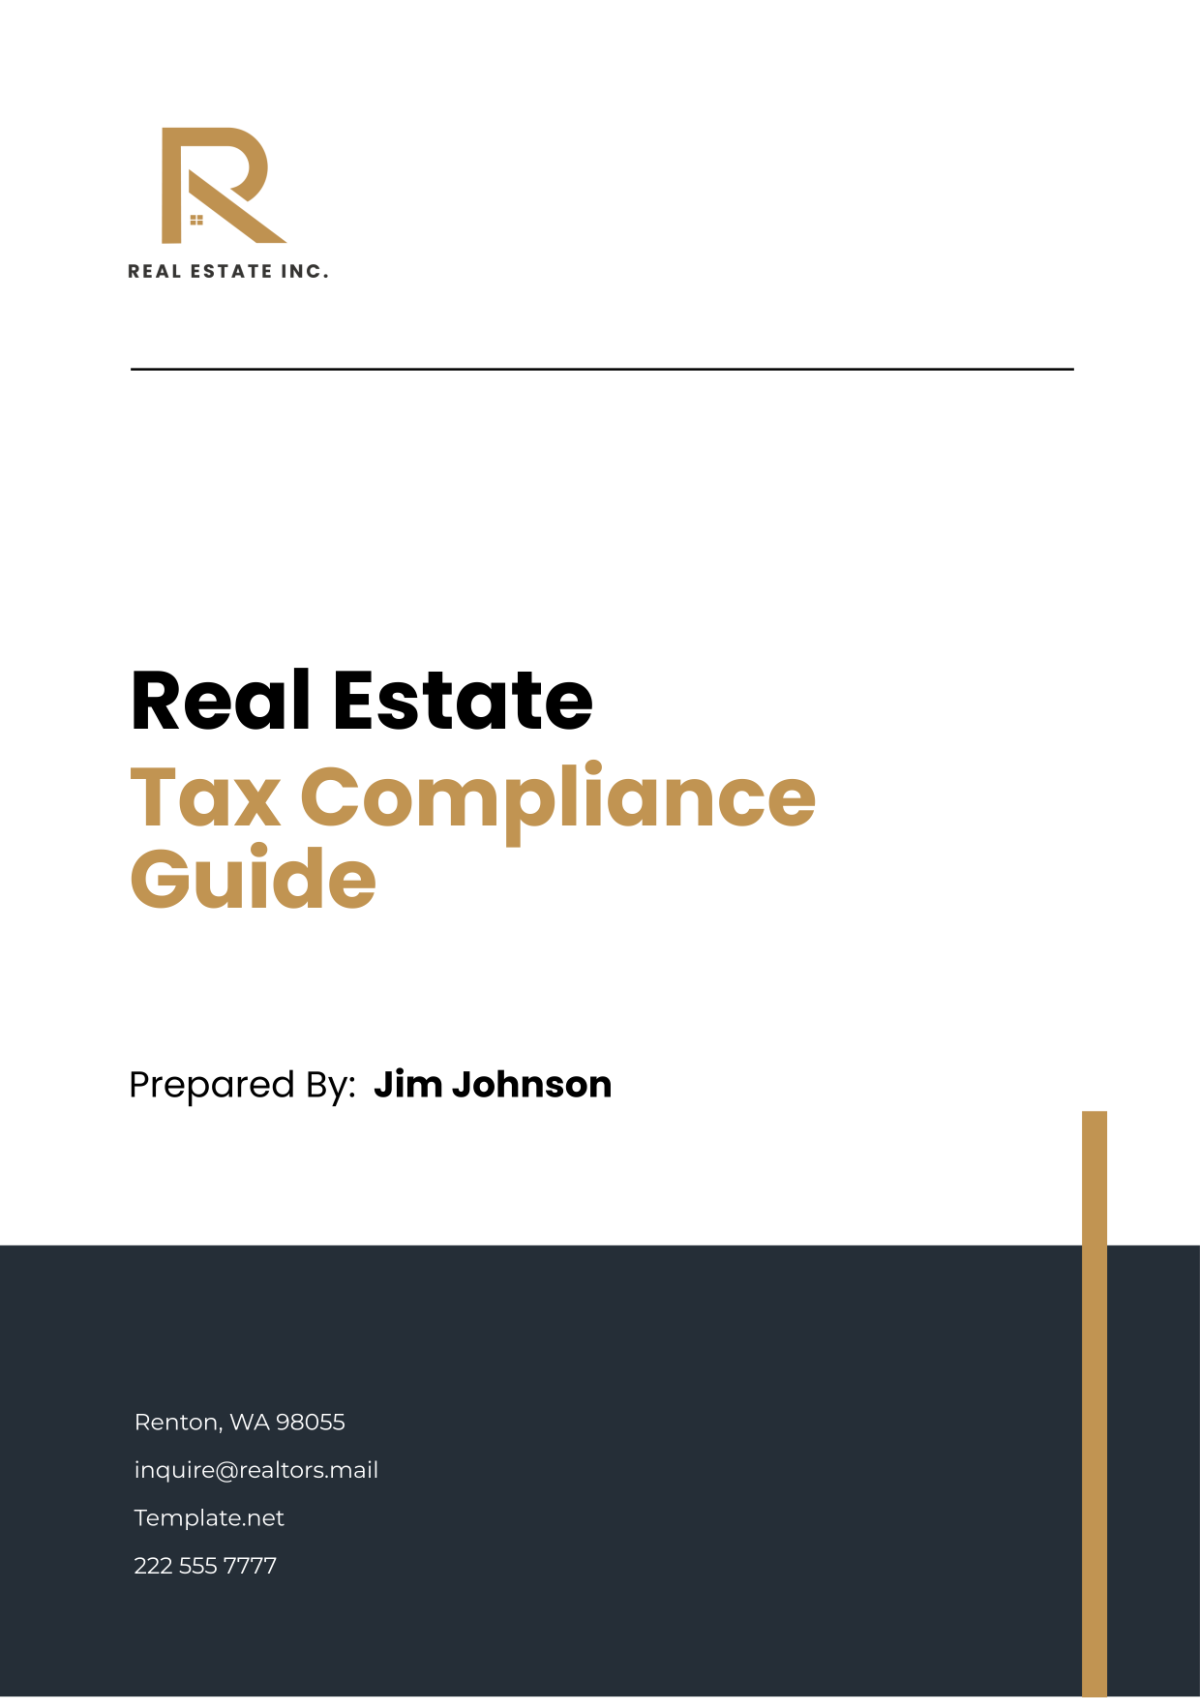 Real Estate Tax Compliance Guide Template